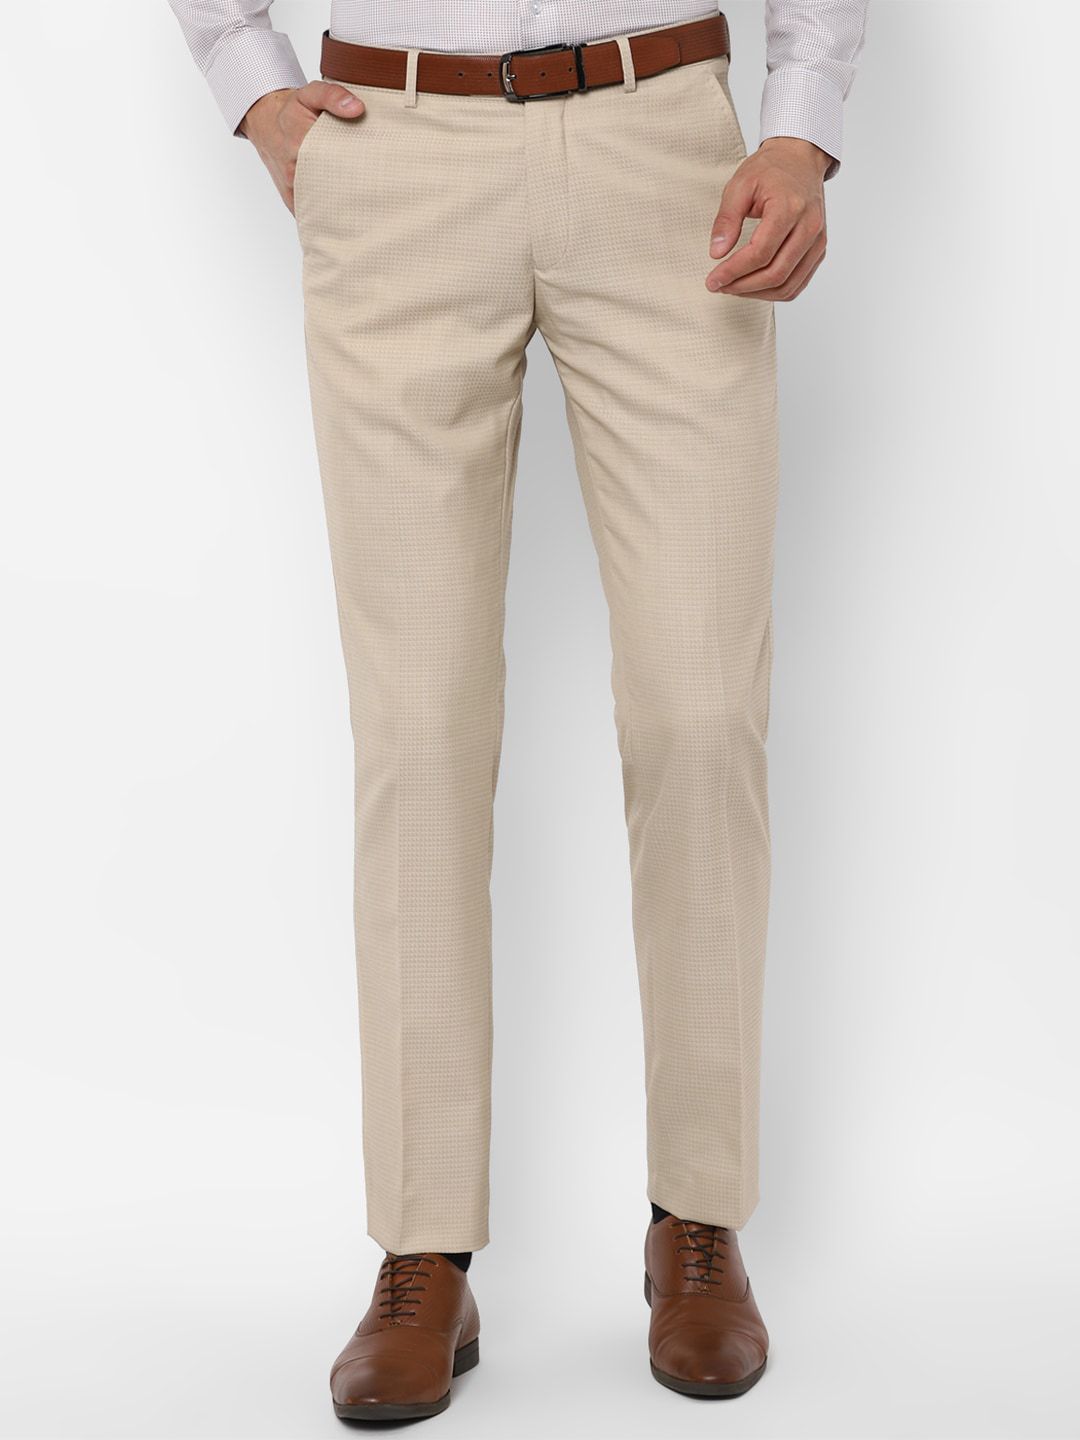 Louis Philippe Sport Trousers  Buy Louis Philippe Sport Trousers online in  India